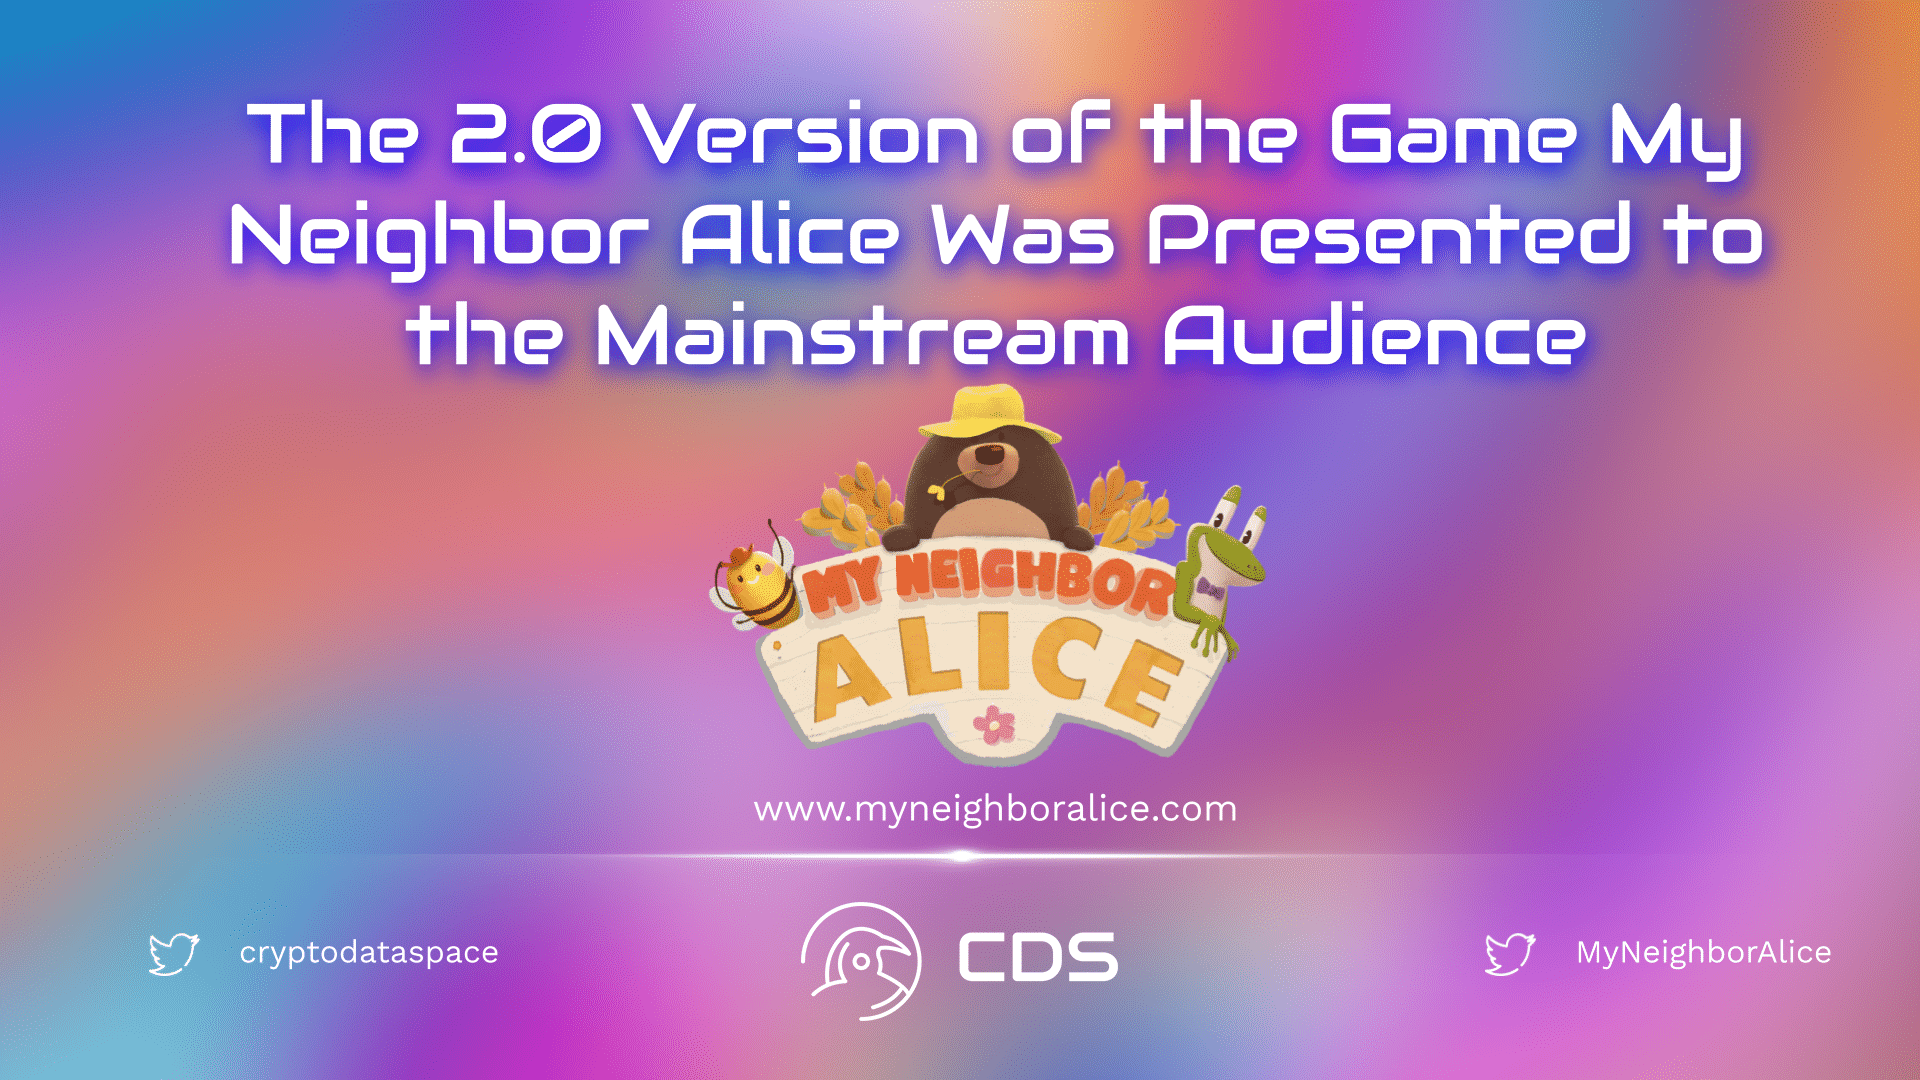 The 2.0 Version of the Game My Neighbor Alice Was Presented to the Mainstream Audience